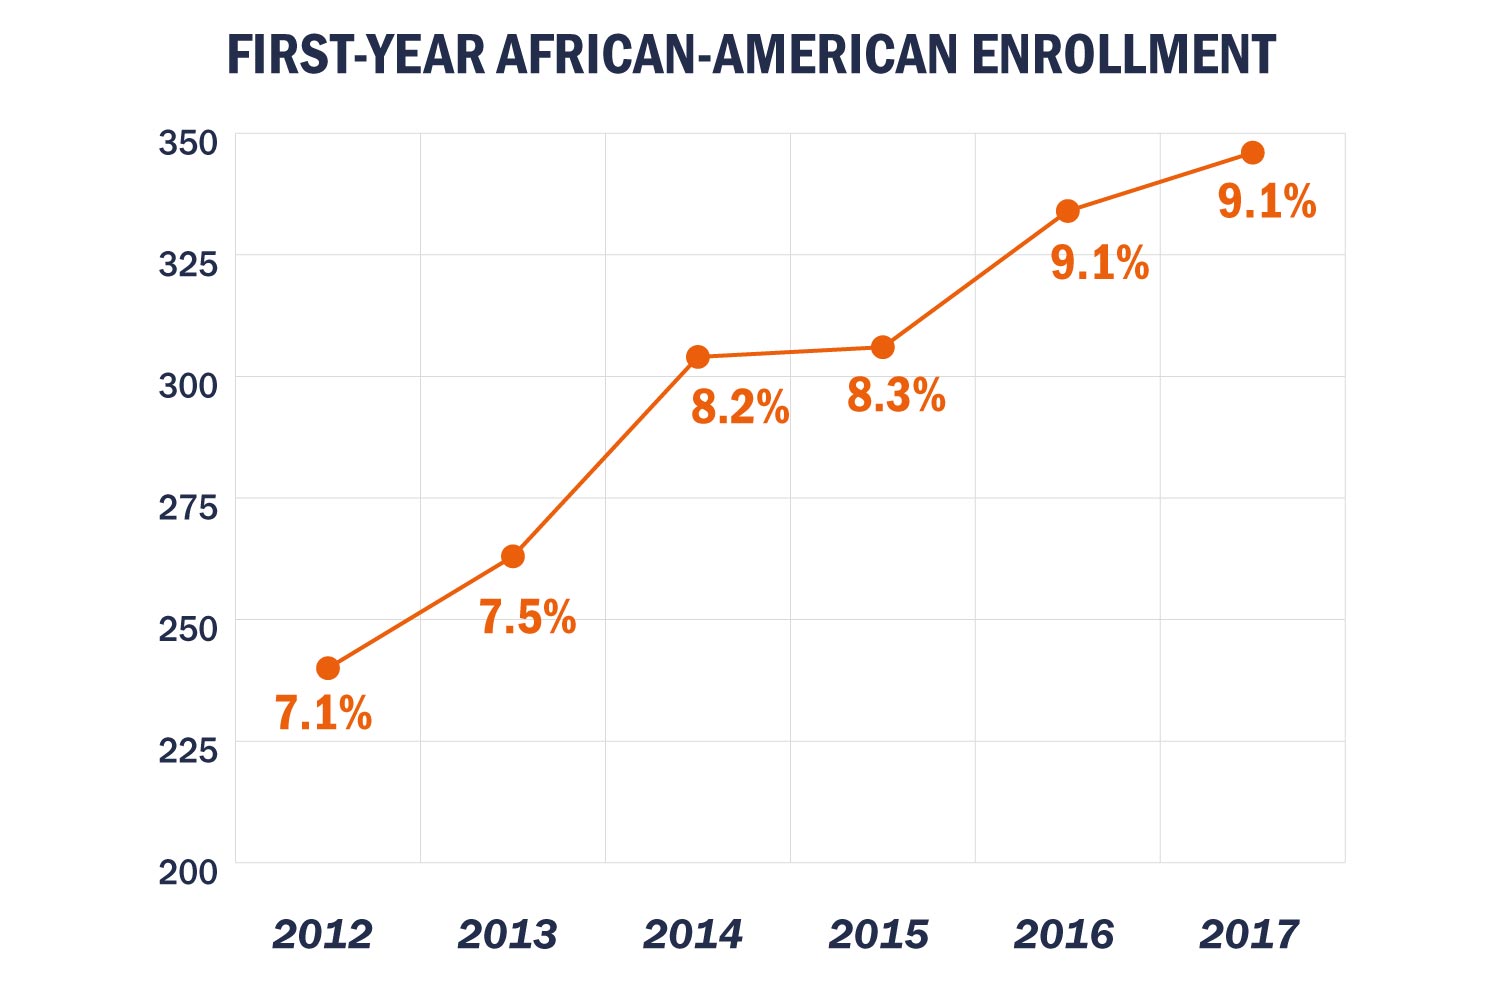 Line Chart of First-year african-american enrollment. 2012: 7.1%, 2013: 7.5%, 2014: 8.2%, 2015: 8.3%, 2016: 9.1%, 2017: 9.1%